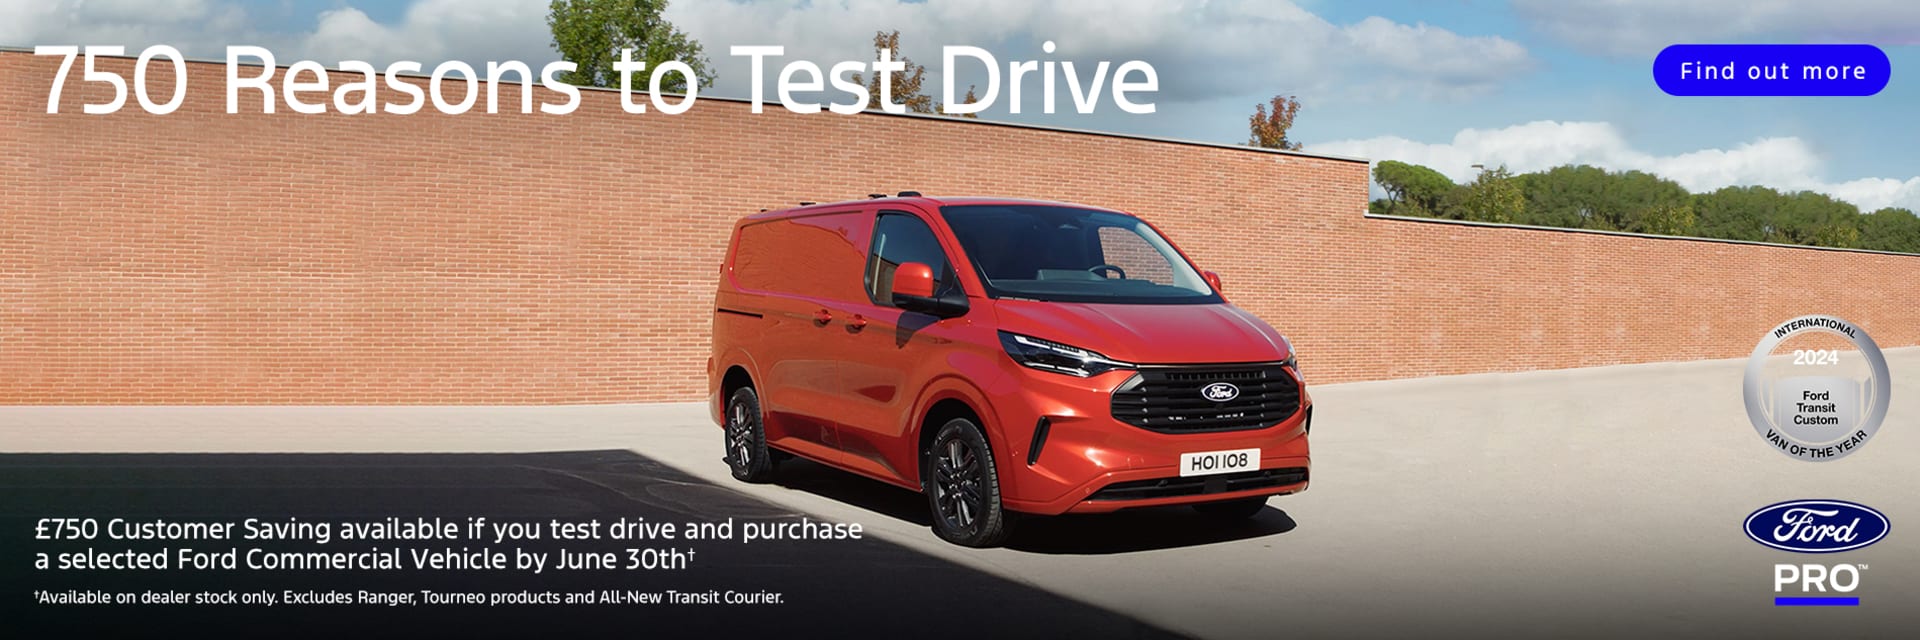 750 reasons to book a test drive in June 2024 